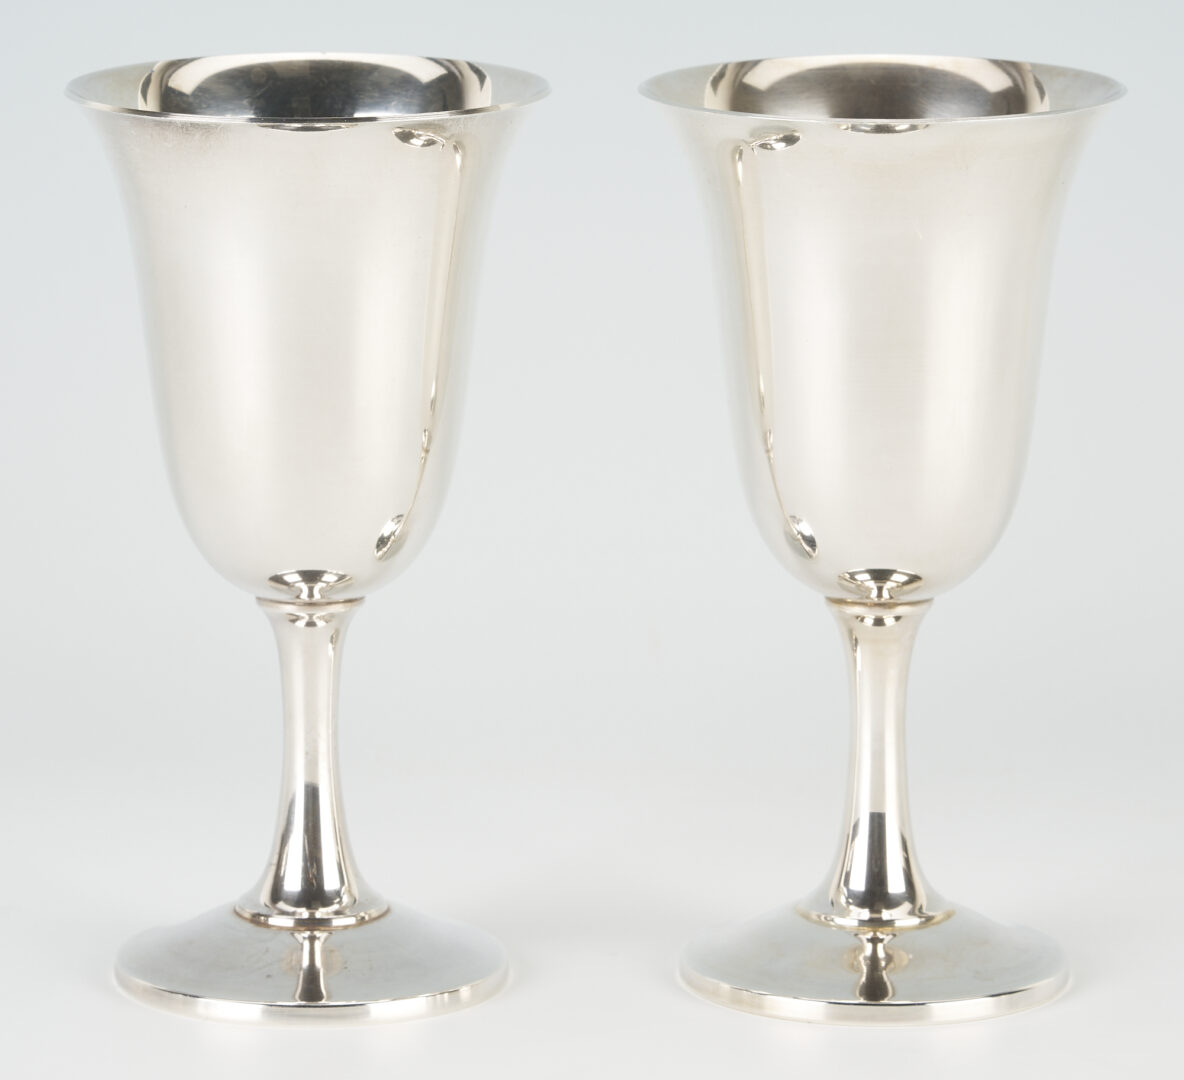 Lot 291: 6 Wallace Sterling Goblets & 8 Sterling Tall Tumblers or Cups, 14 items